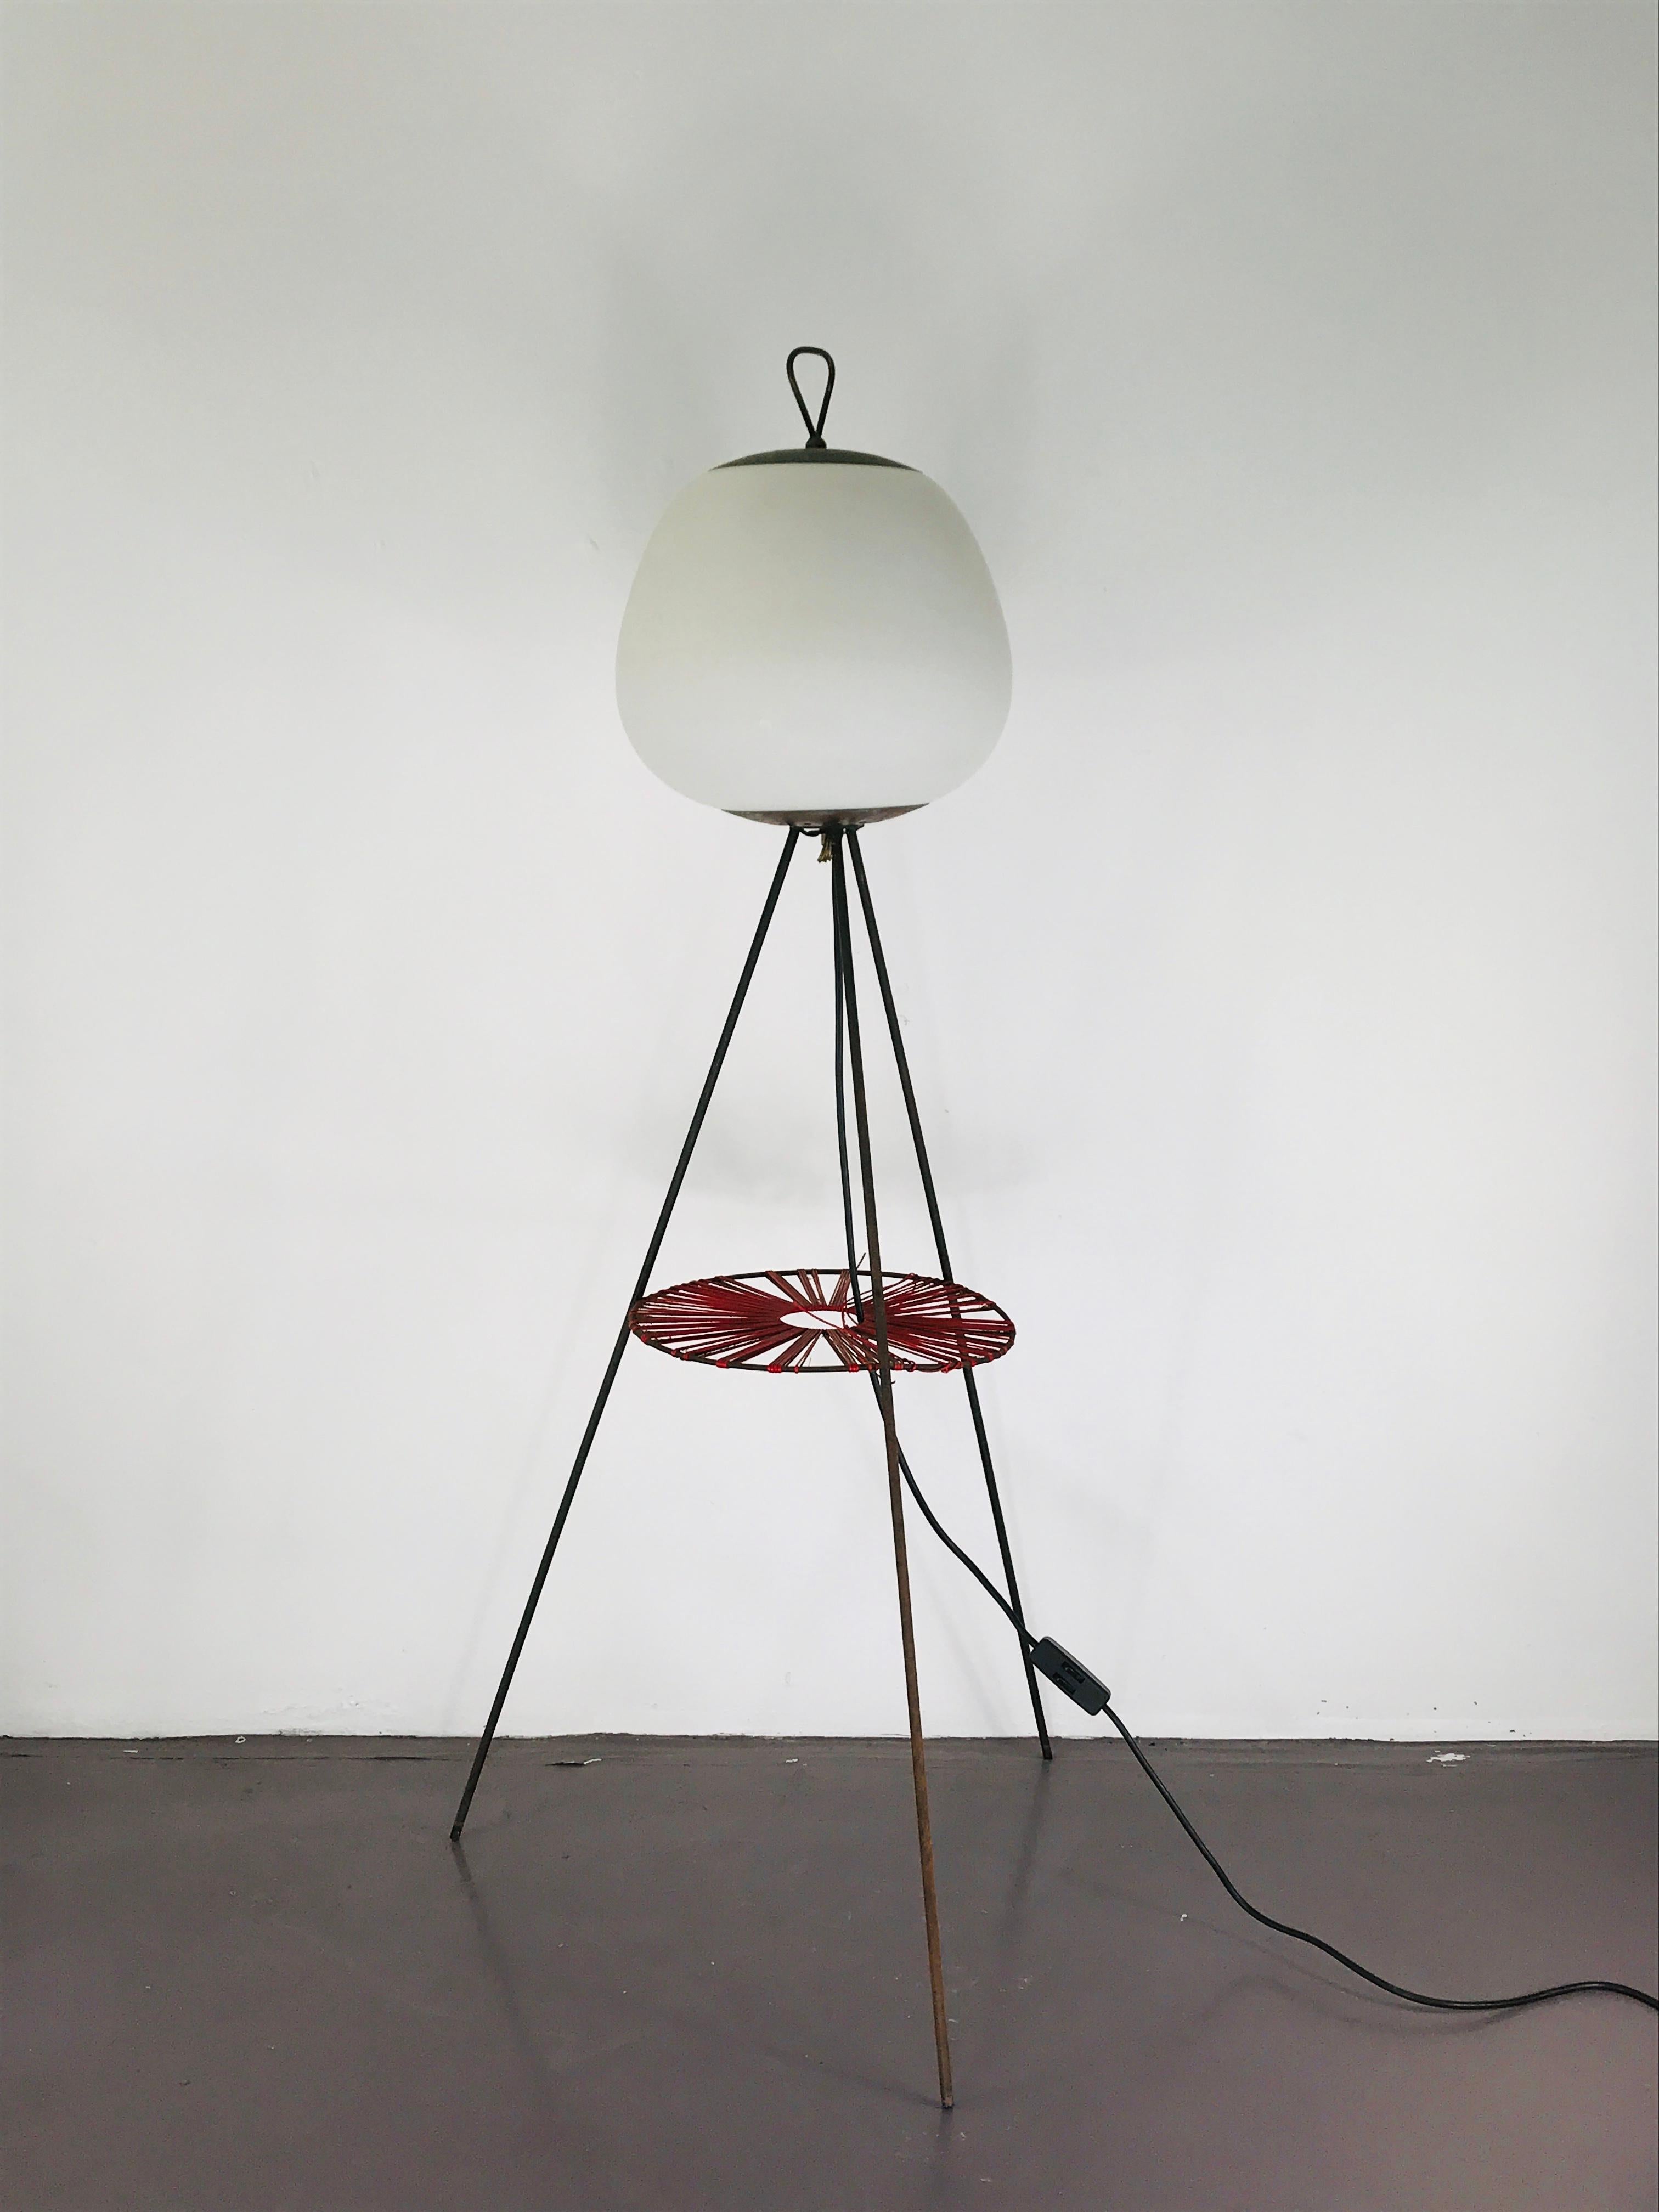 Midcentury Italian Floor Lamp in Glass and Metal Red and Blue Light, 1950 In Fair Condition For Sale In Byron Bay, NSW